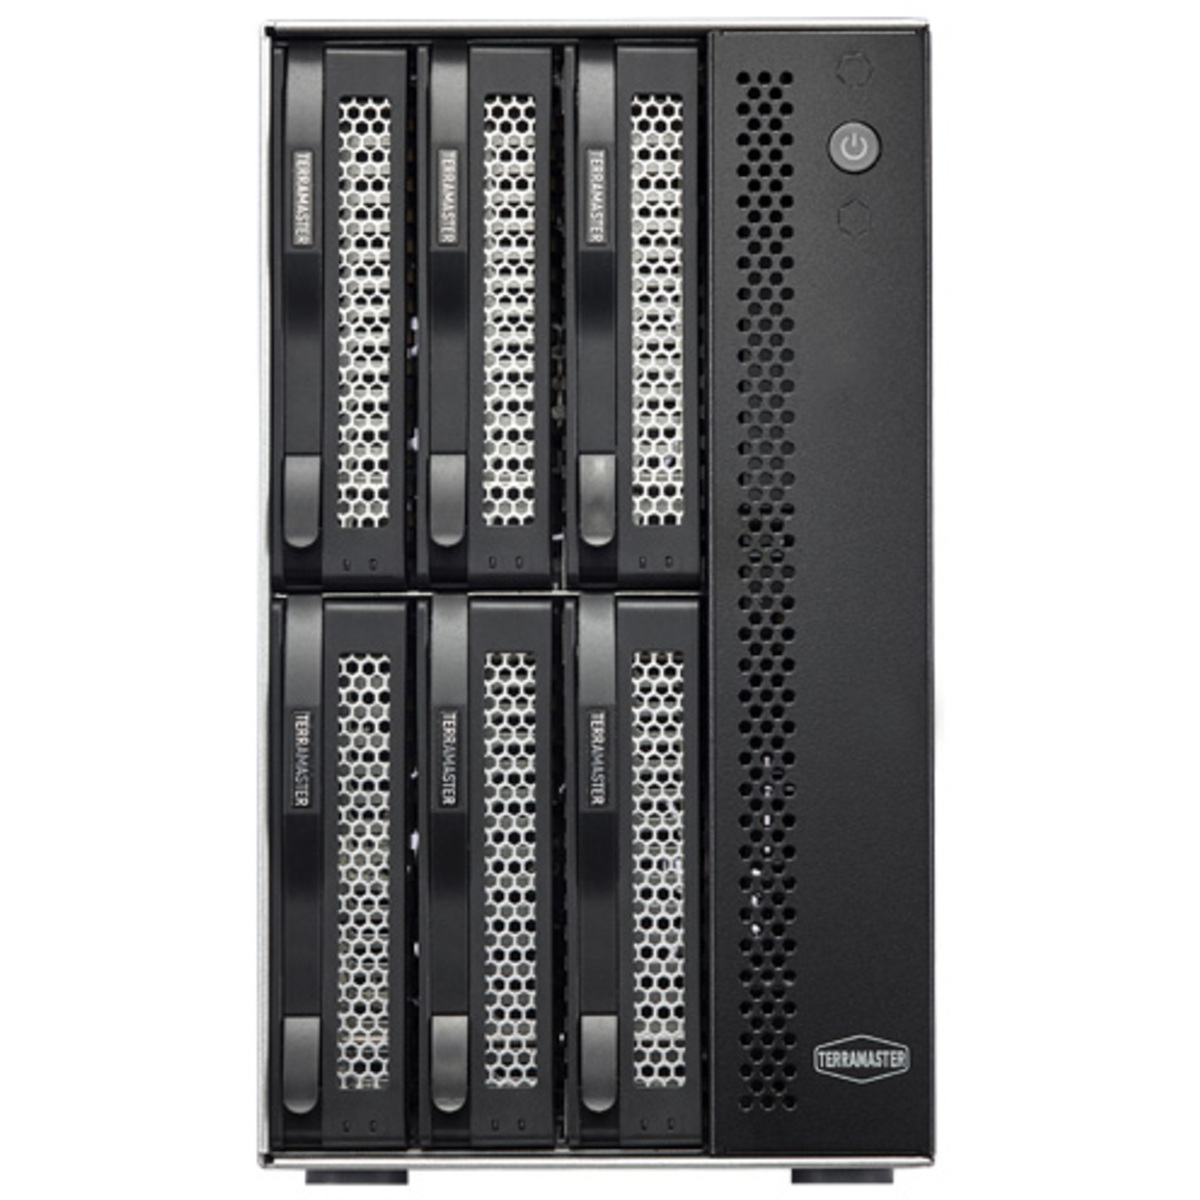 TerraMaster T6-423 66tb 6-Bay Desktop Multimedia / Power User / Business NAS - Network Attached Storage Device 3x22tb Toshiba Enterprise Capacity MG10AFA22TE 3.5 7200rpm SATA 6Gb/s HDD ENTERPRISE Class Drives Installed - Burn-In Tested - FREE RAM UPGRADE T6-423